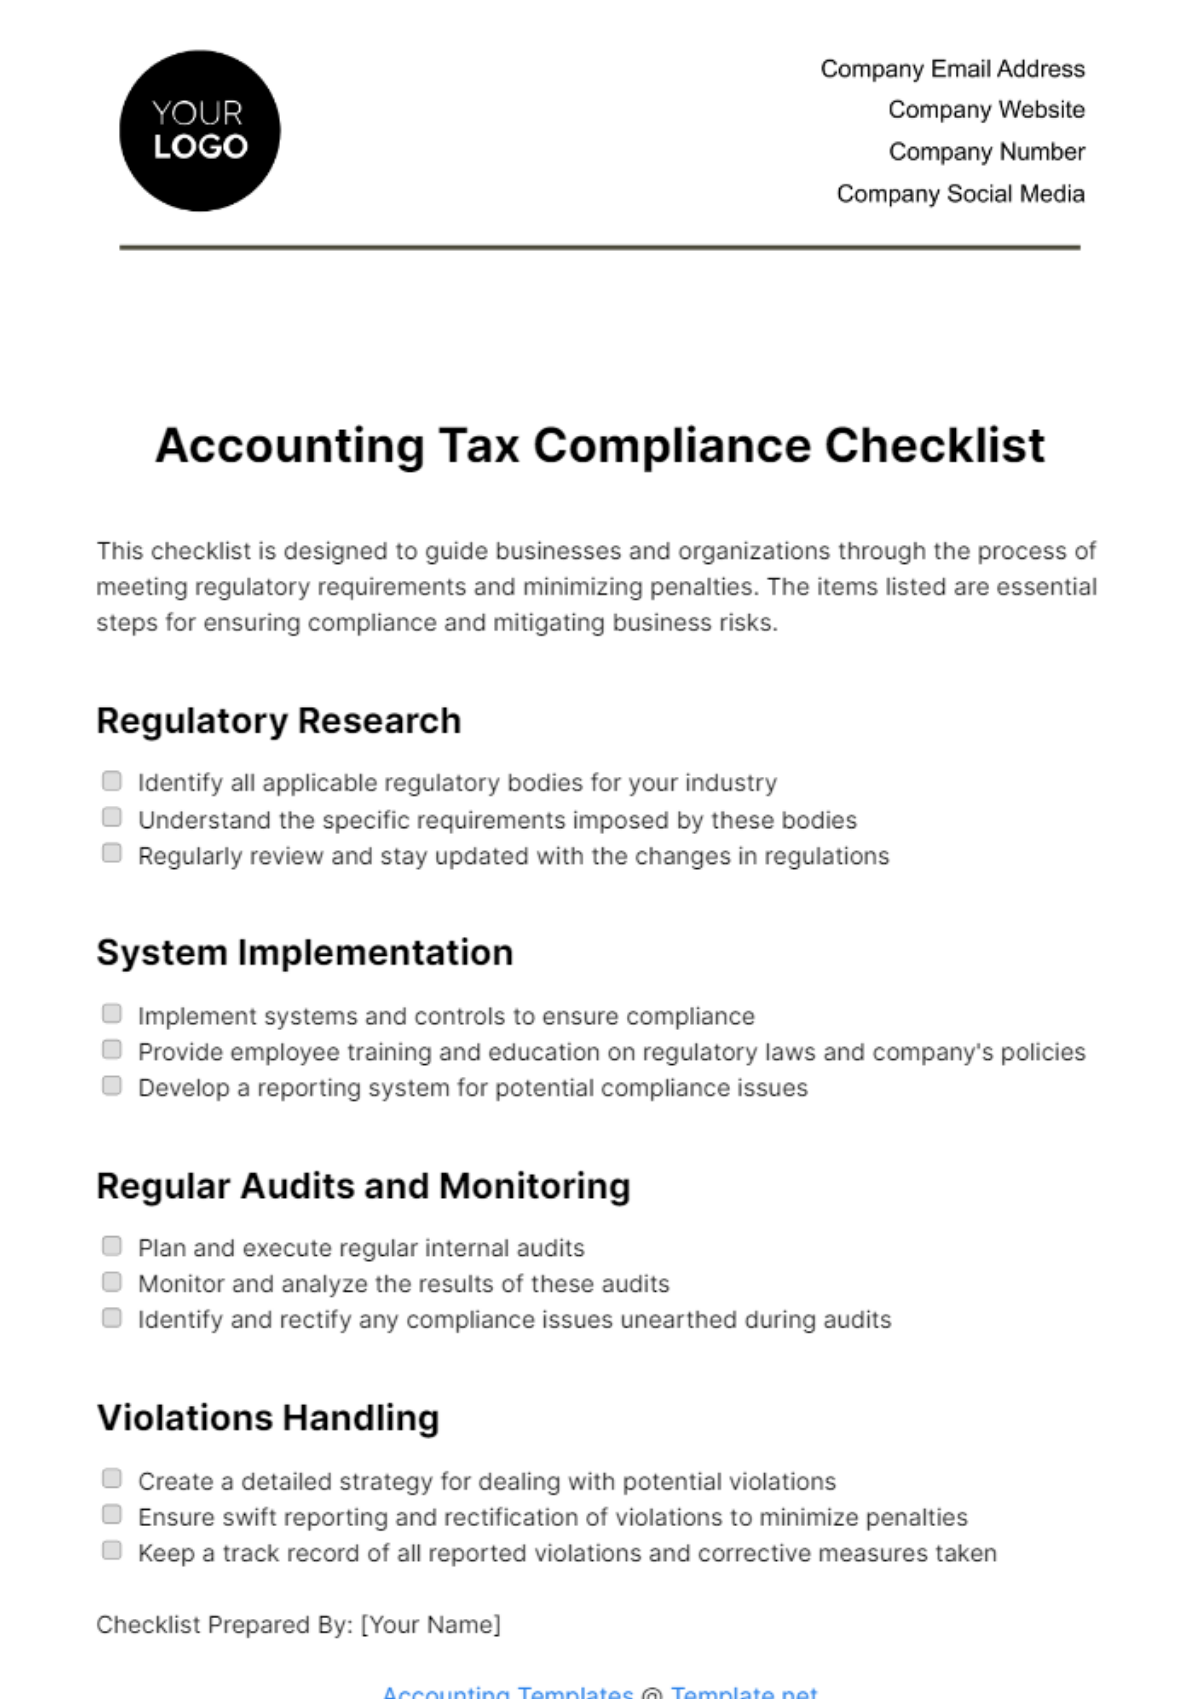 Accounting Tax Compliance Checklist Template